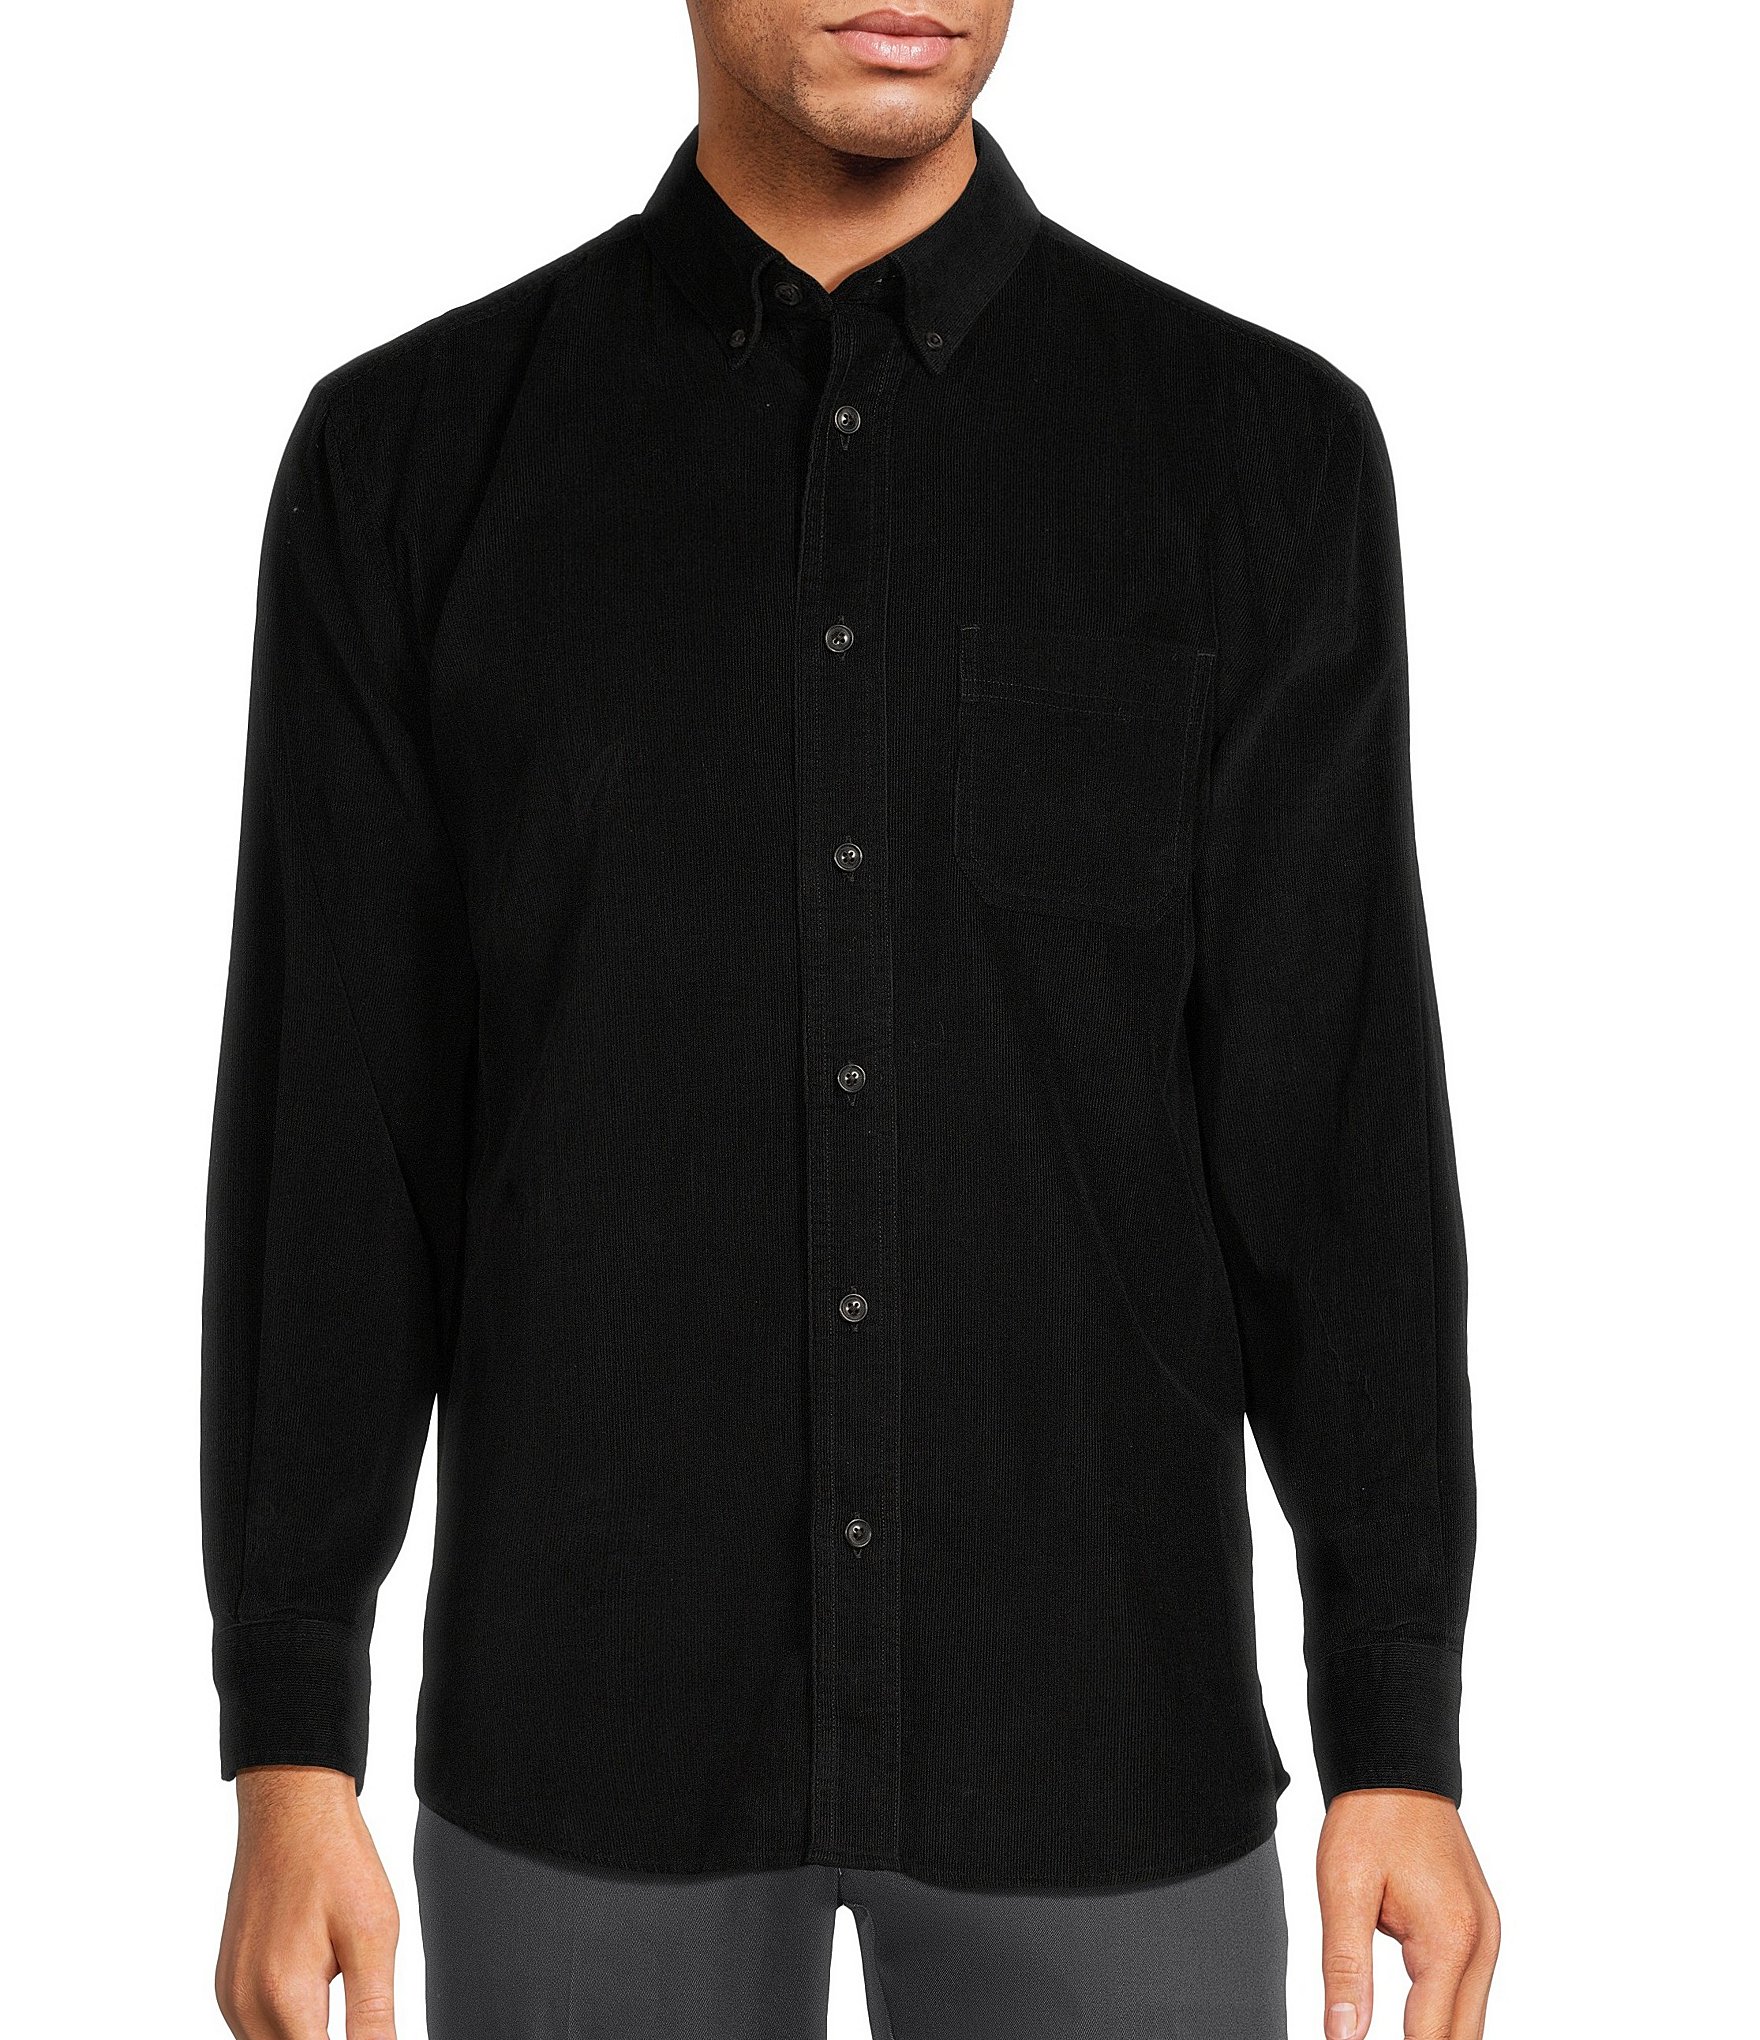 solid: Men's Casual Button-Up Shirts